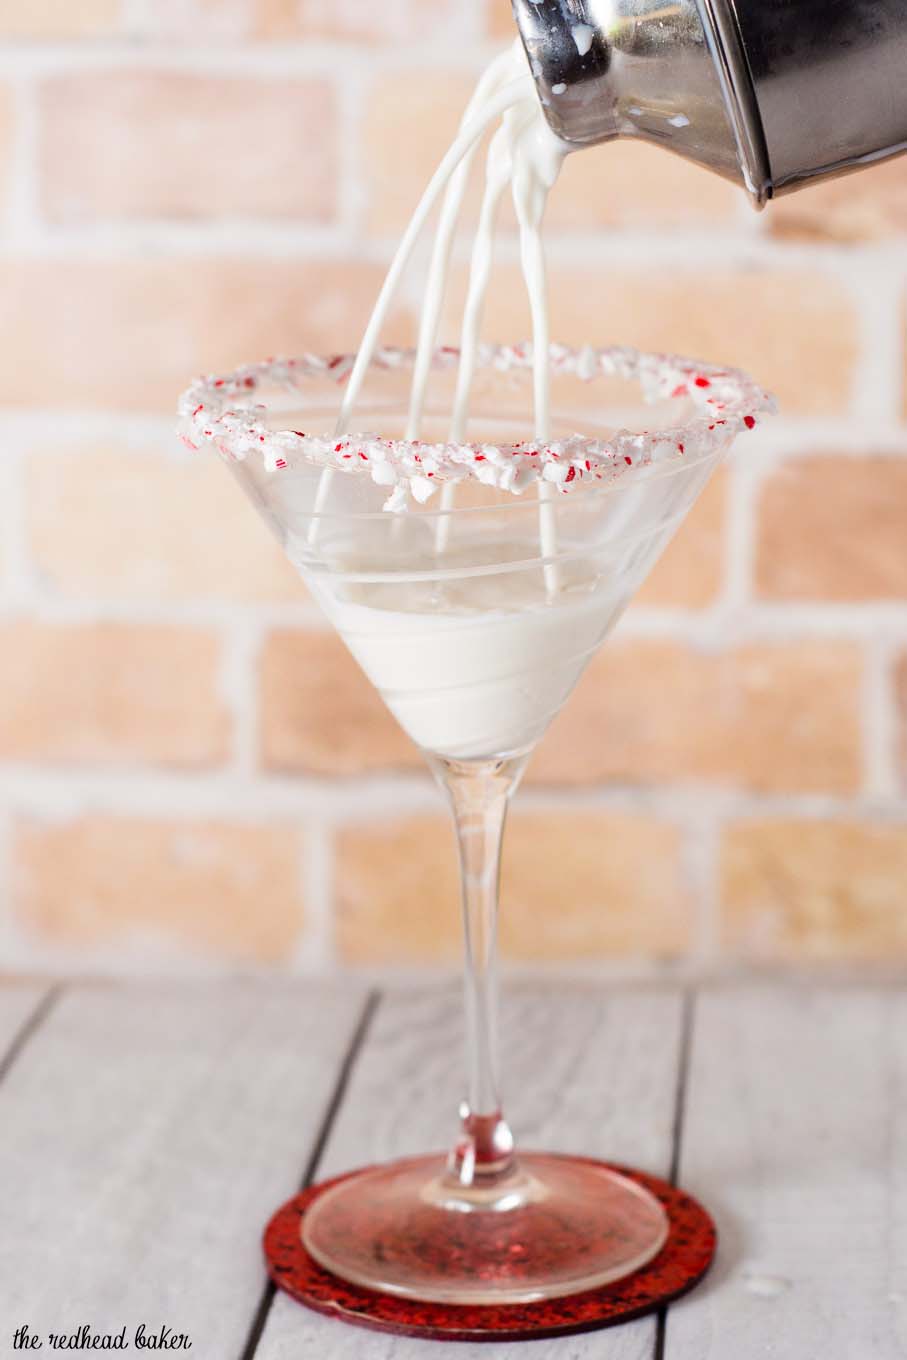 It doesn't get more festive than a candy cane martini for the holidays! Shake up a batch of this creamy cocktail for your holiday party. #ProgressiveEats